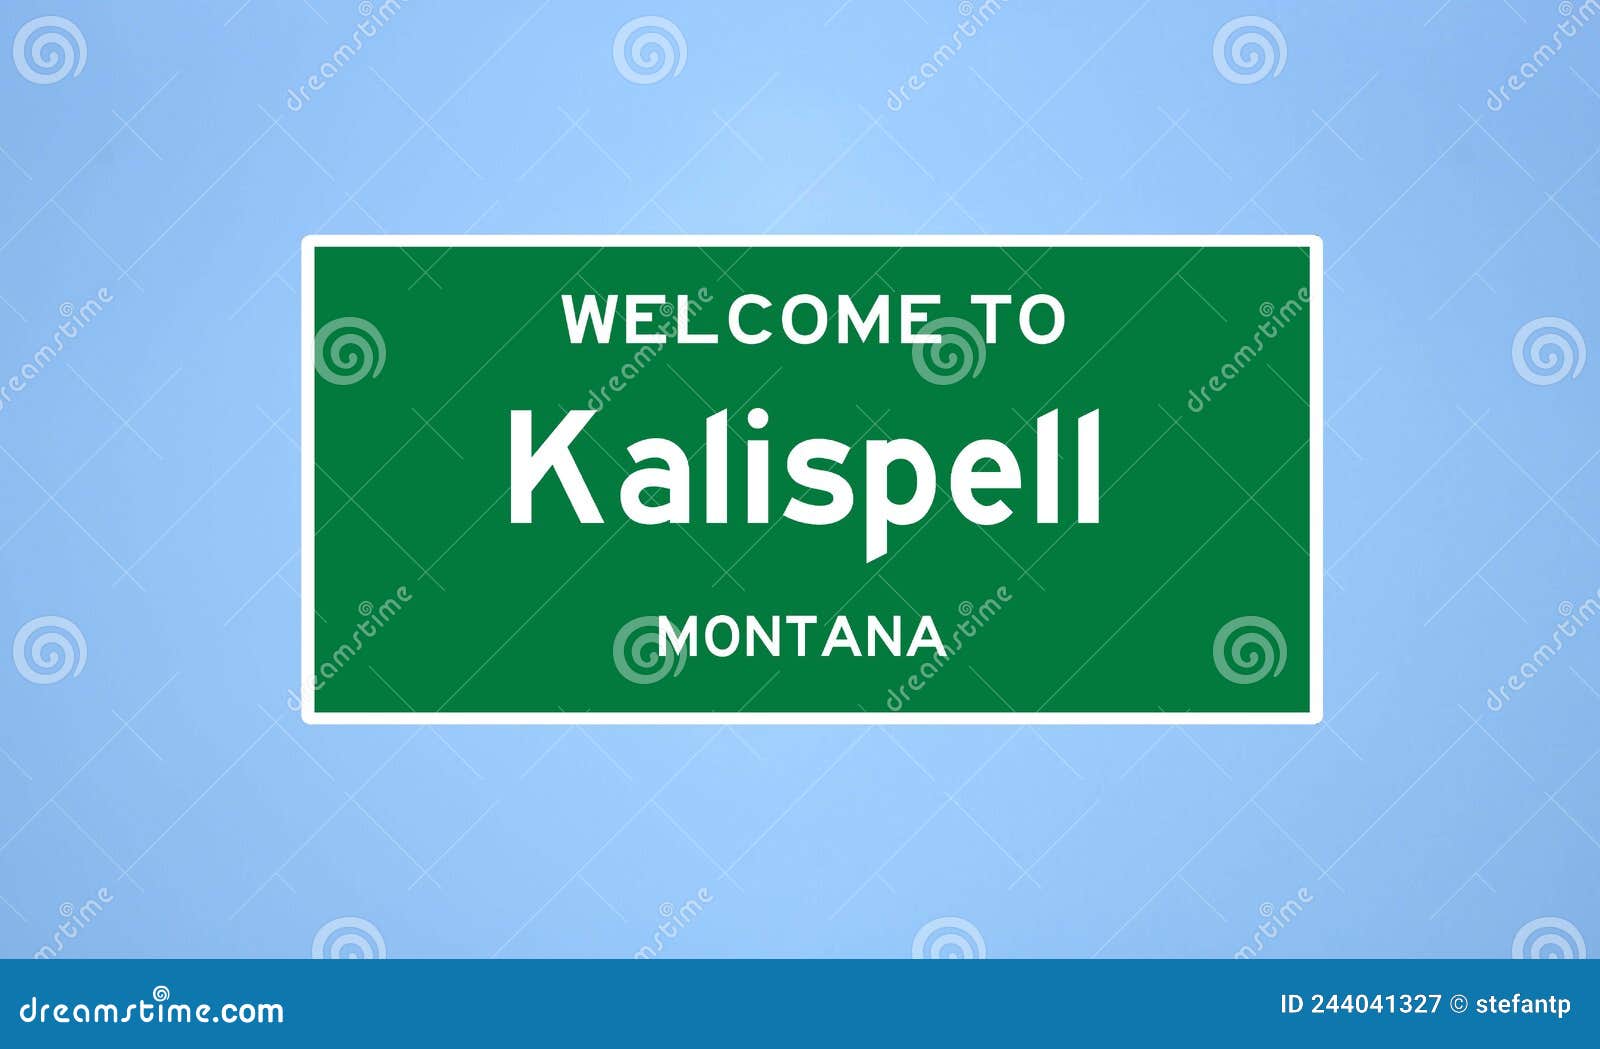 kalispell, montana city limit sign. town sign from the usa.